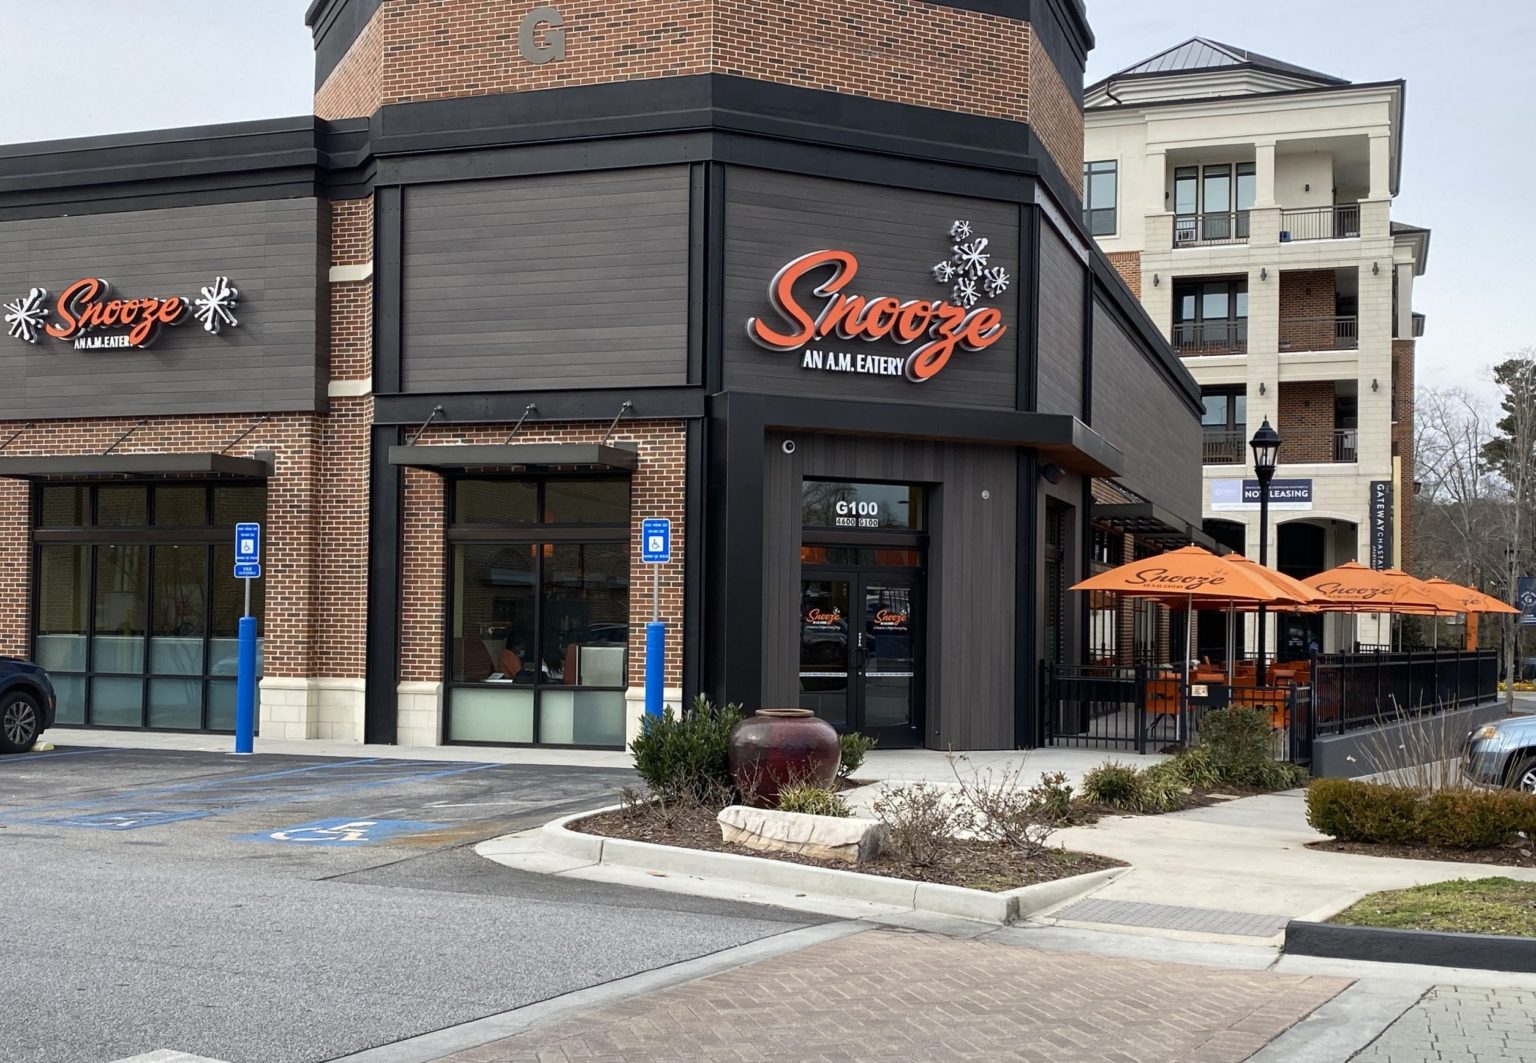 An Exterior Photo Of The Snooze North Buckhead Restaurant Showing The Front Entrance